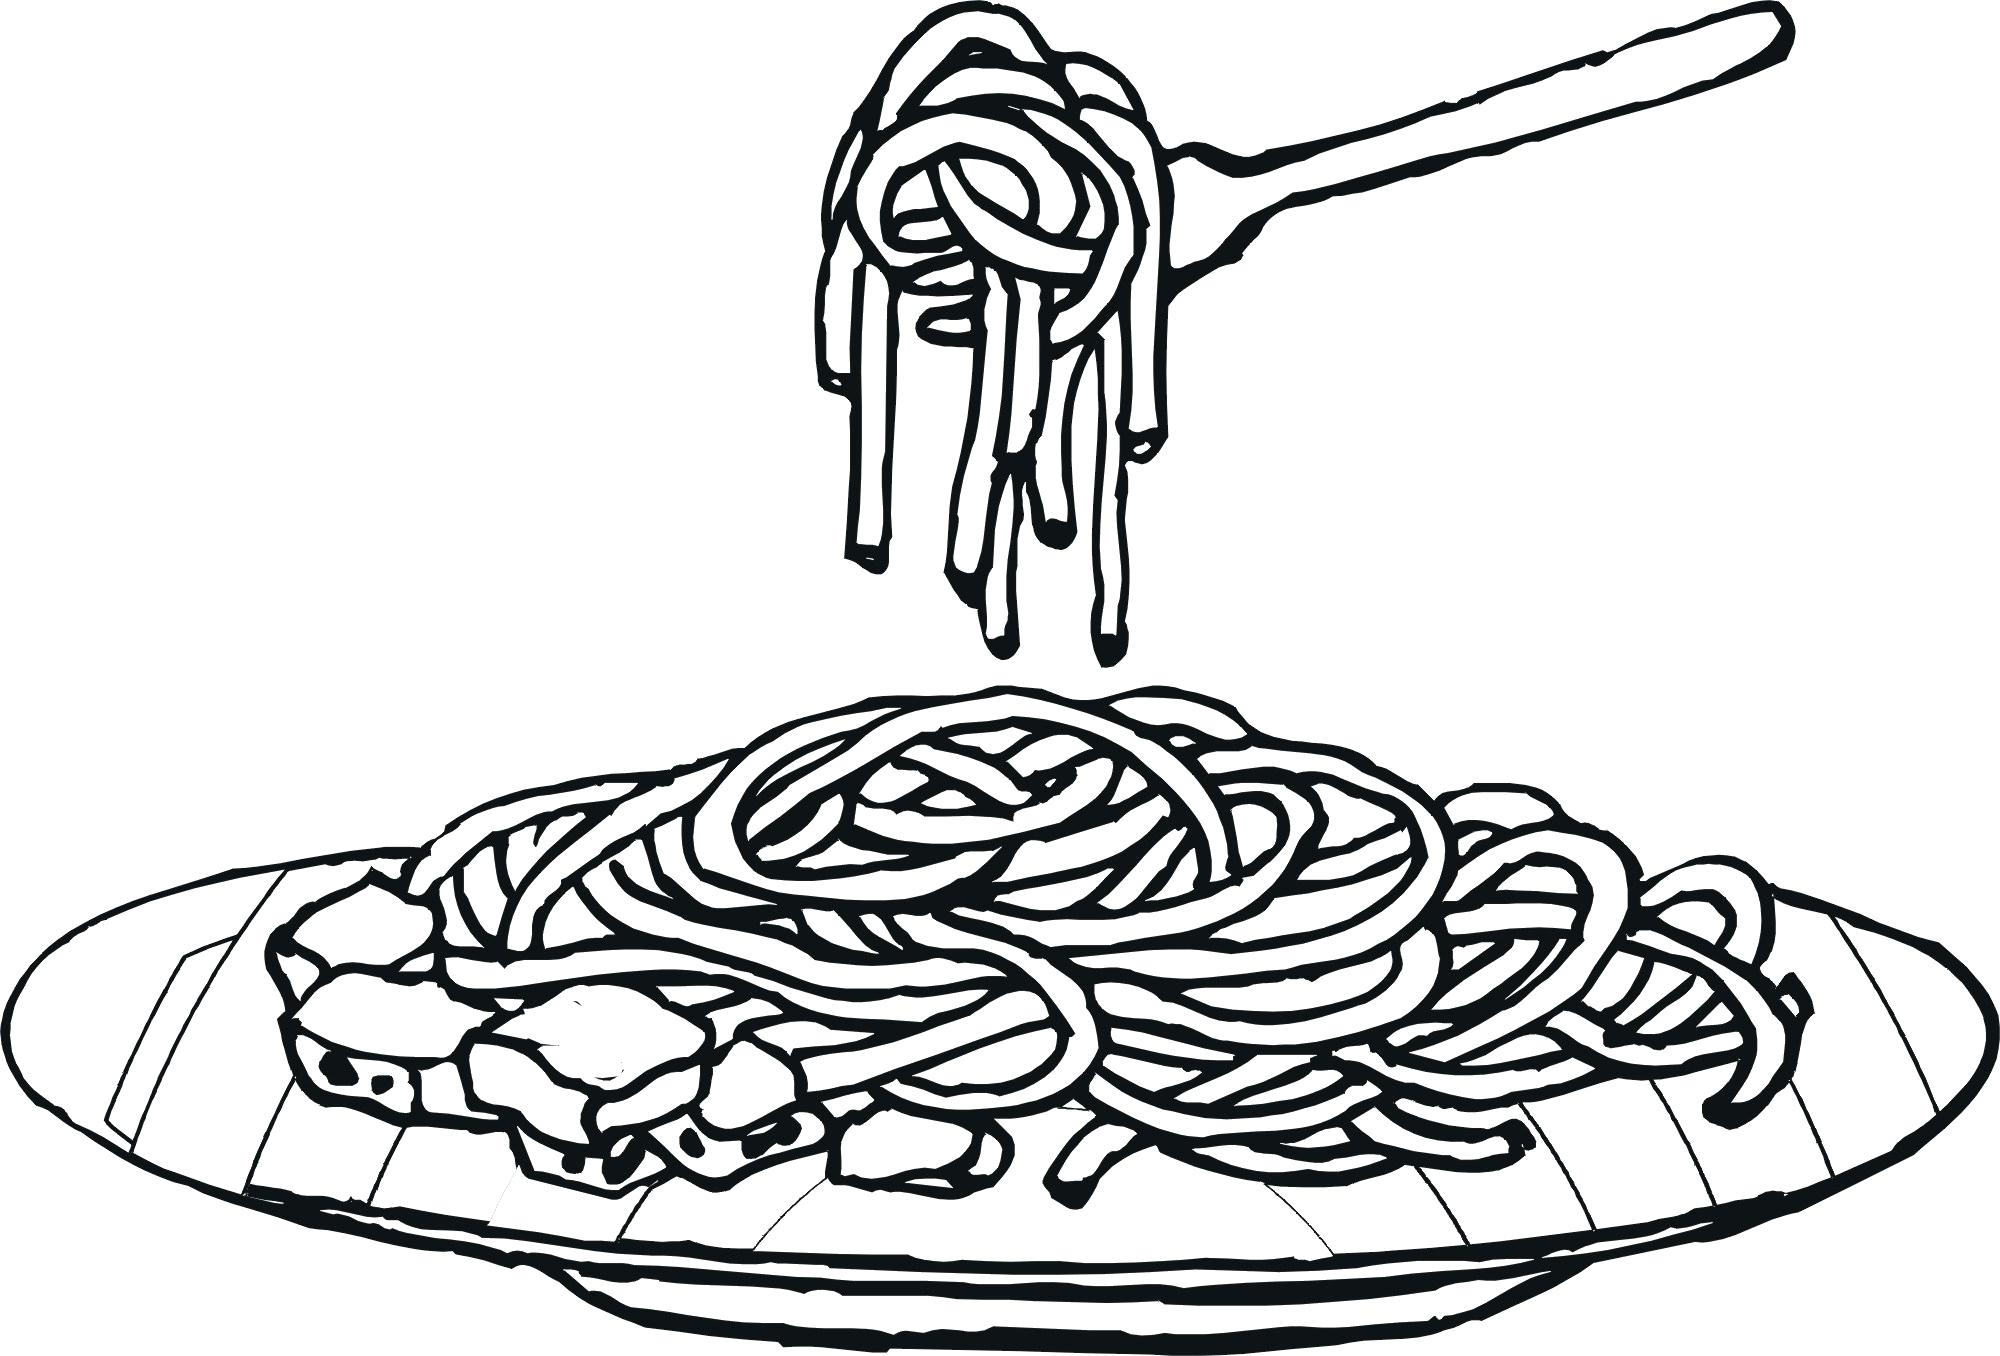 Noodles Coloring Pages   Coloring Home